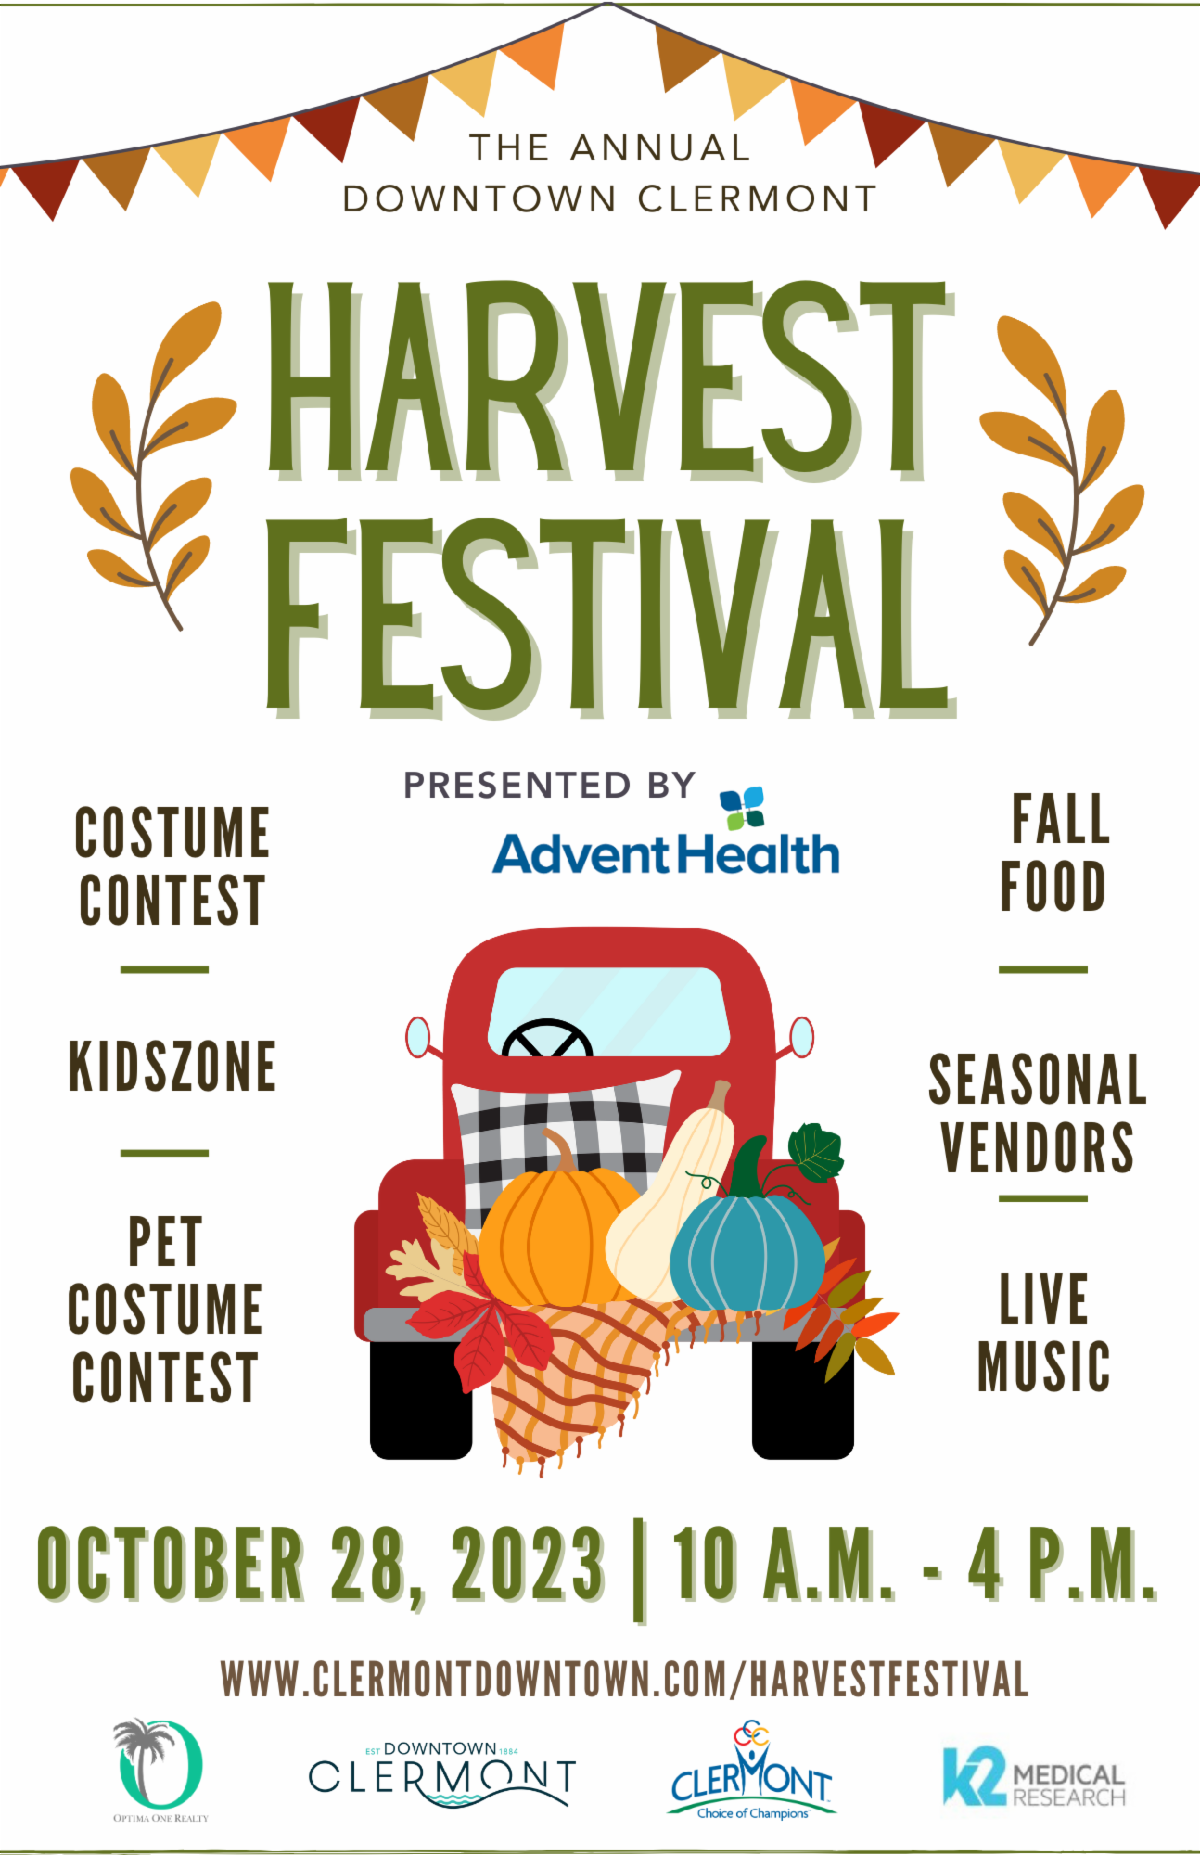 Clermont’s Annual Harvest Festival October 28, 2023. Greater Groves